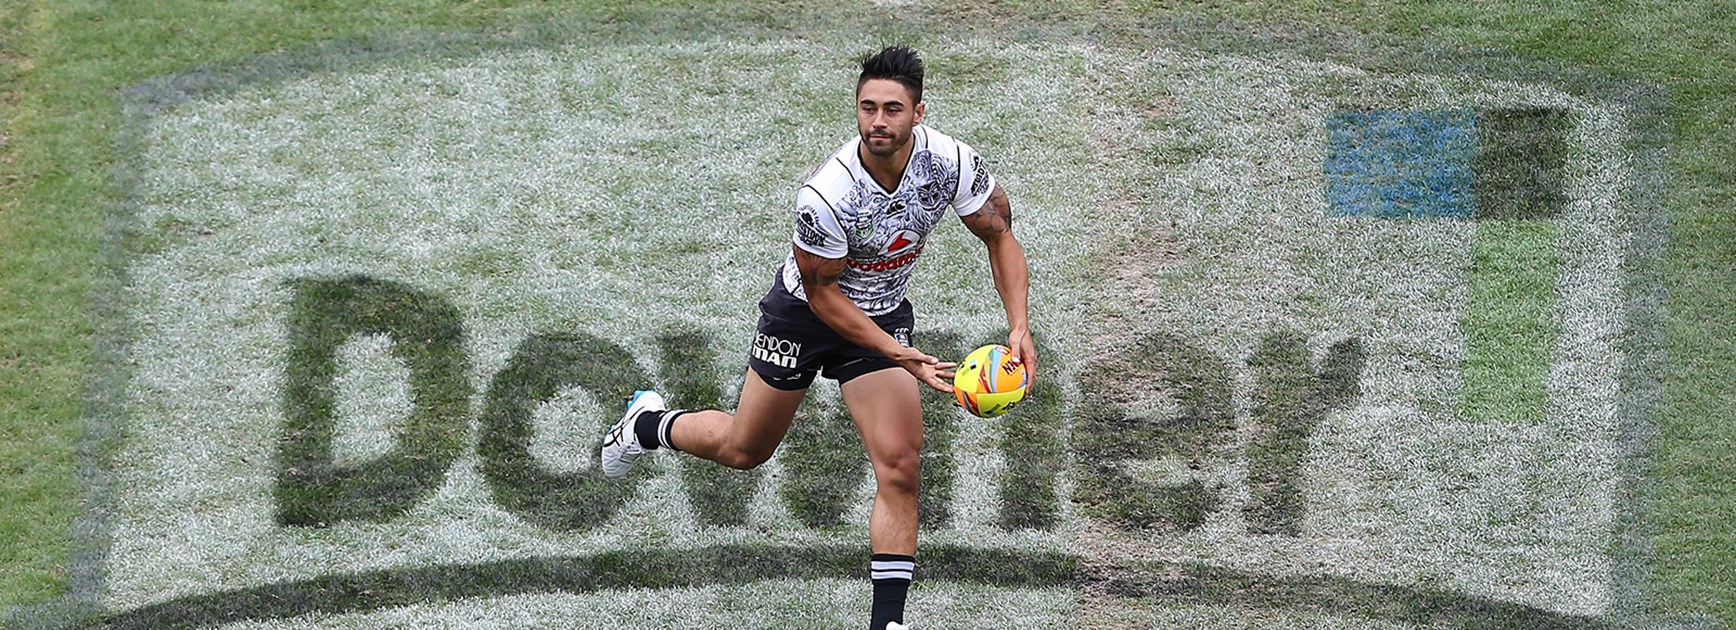 Shaun Johnson in action at the Downer NRL Auckland Nines.